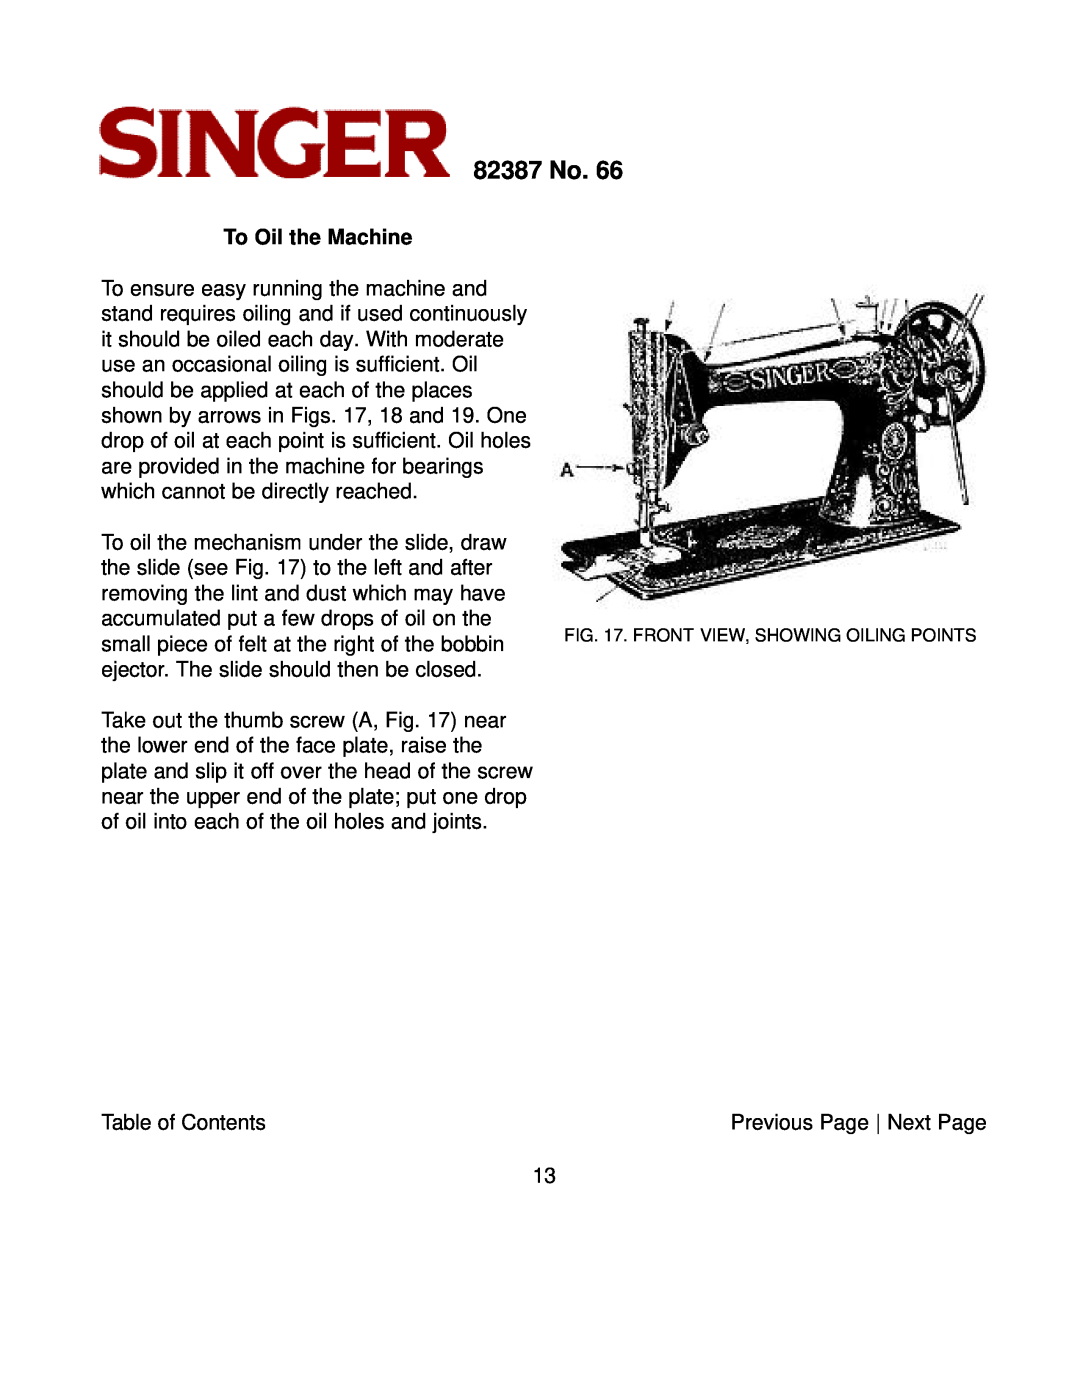 Singer instruction manual To Oil the Machine, 82387 No 